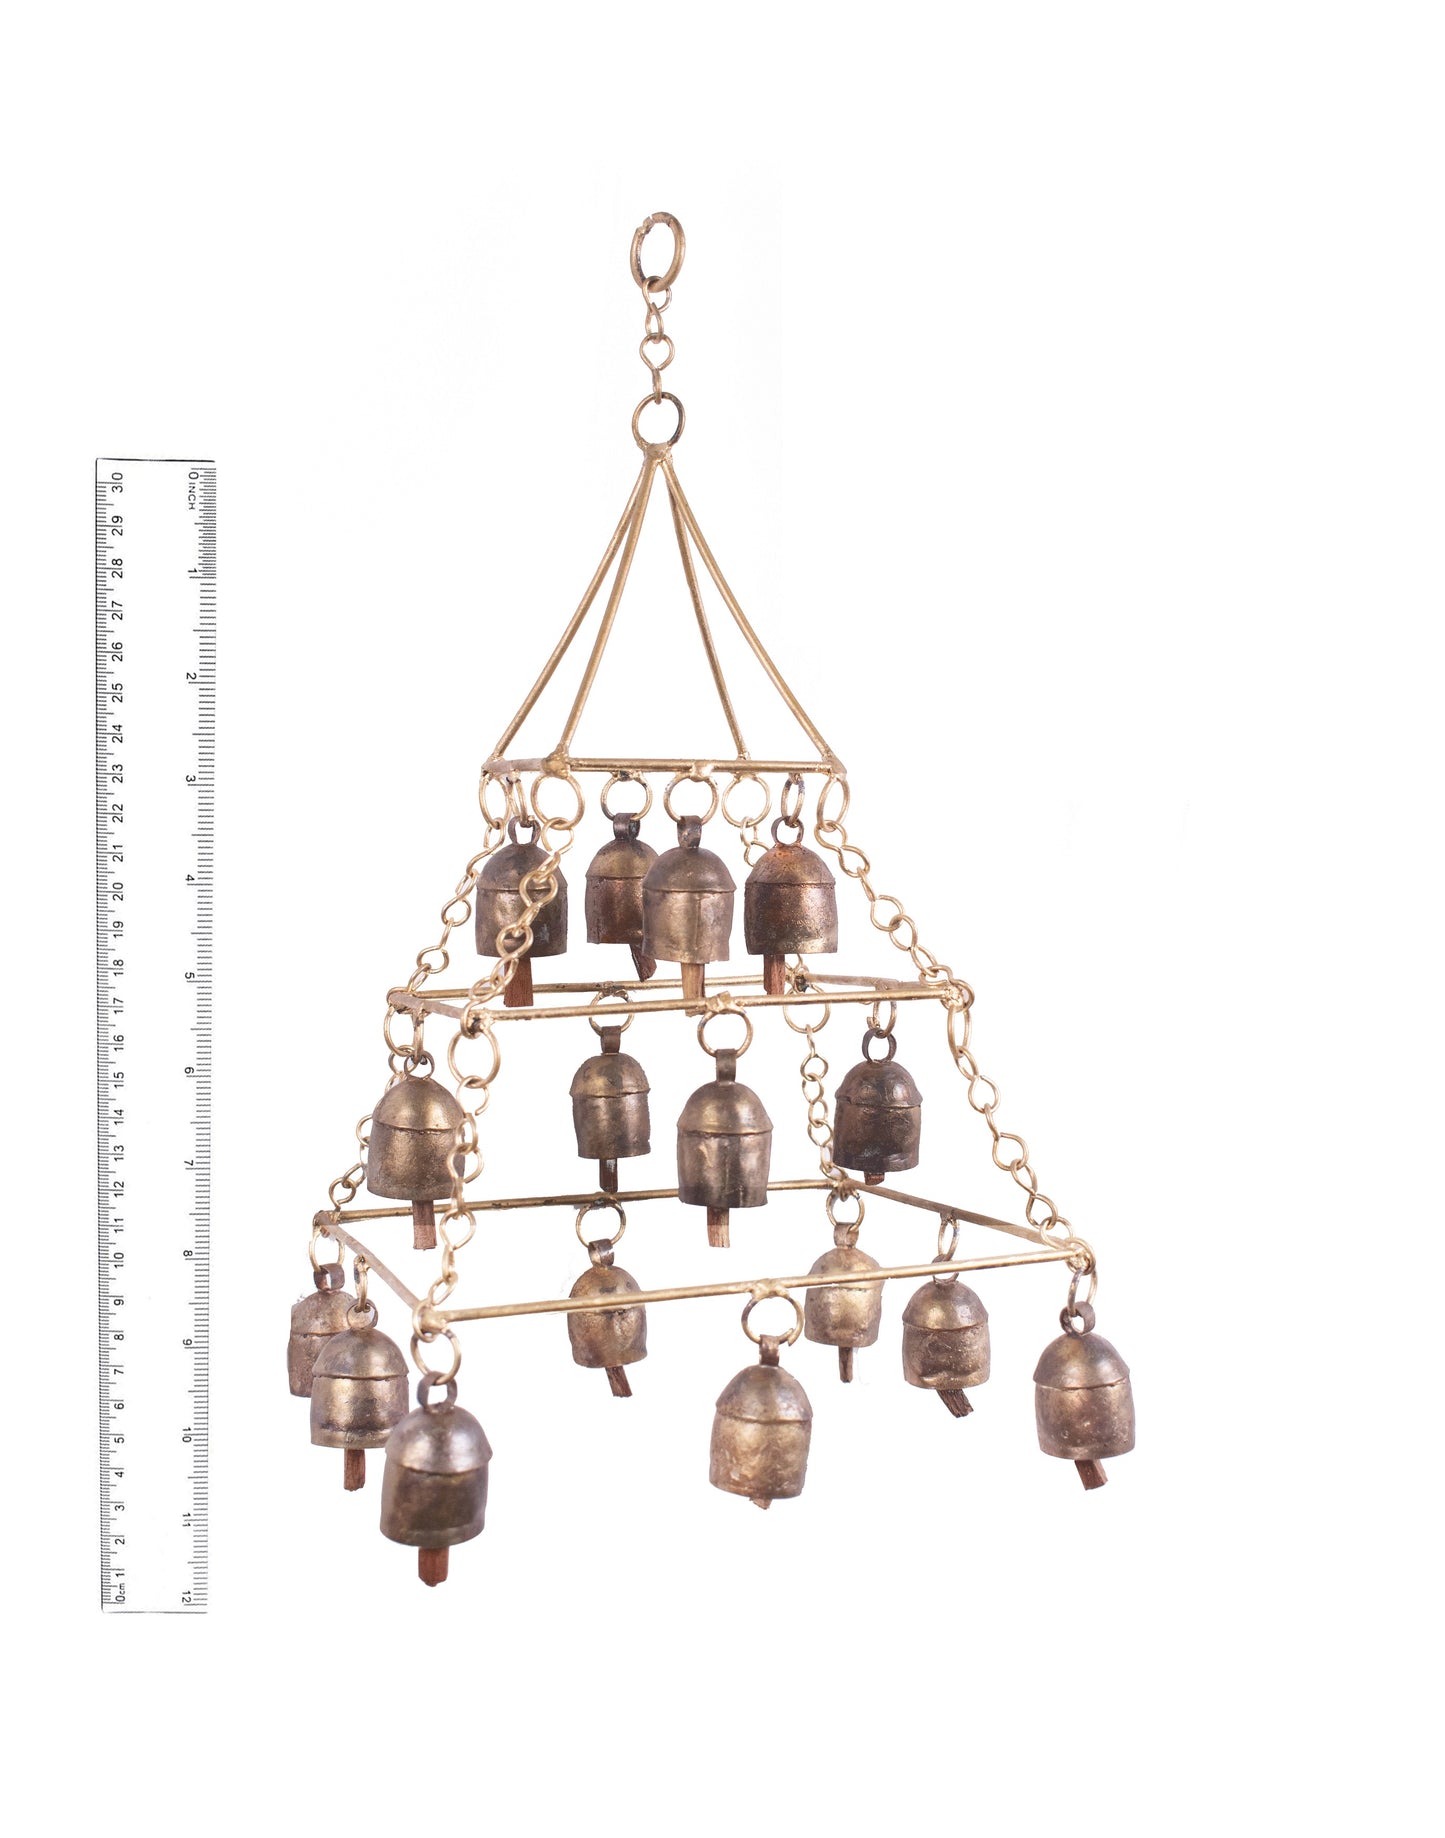 Hand Made Metal Bells Wrought Iron Copper-Zinc Coated Home Décor Chimes Cow Bell   - Squares Zummer - 16 Bells  -  SKU: 0037